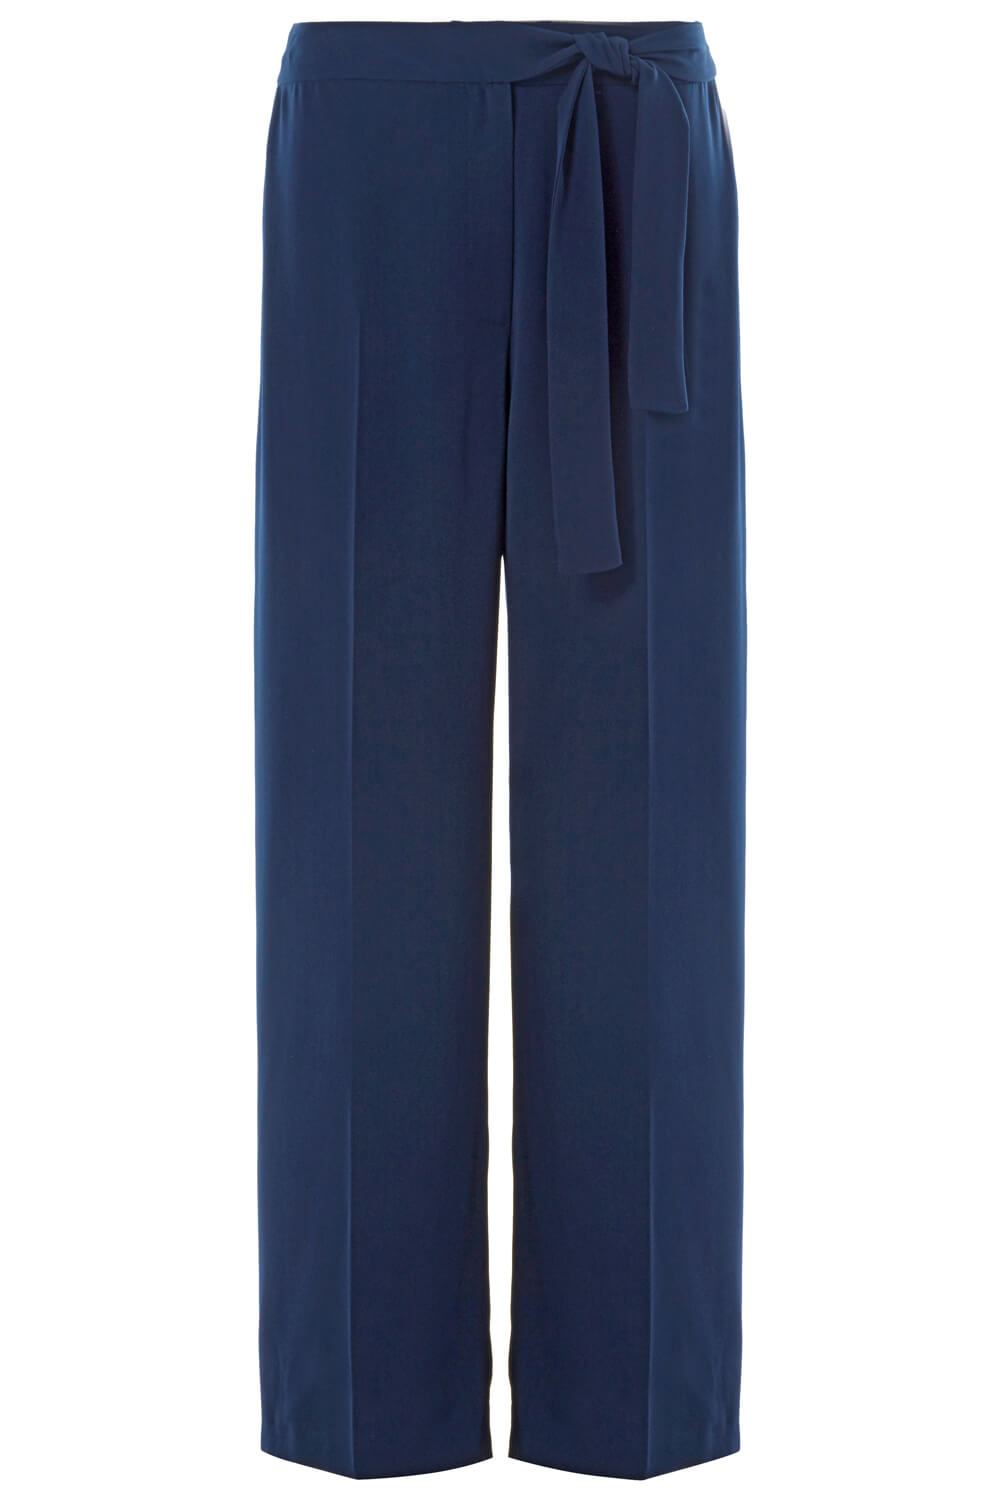 Navy  Side Tie Waist Trousers, Image 4 of 4